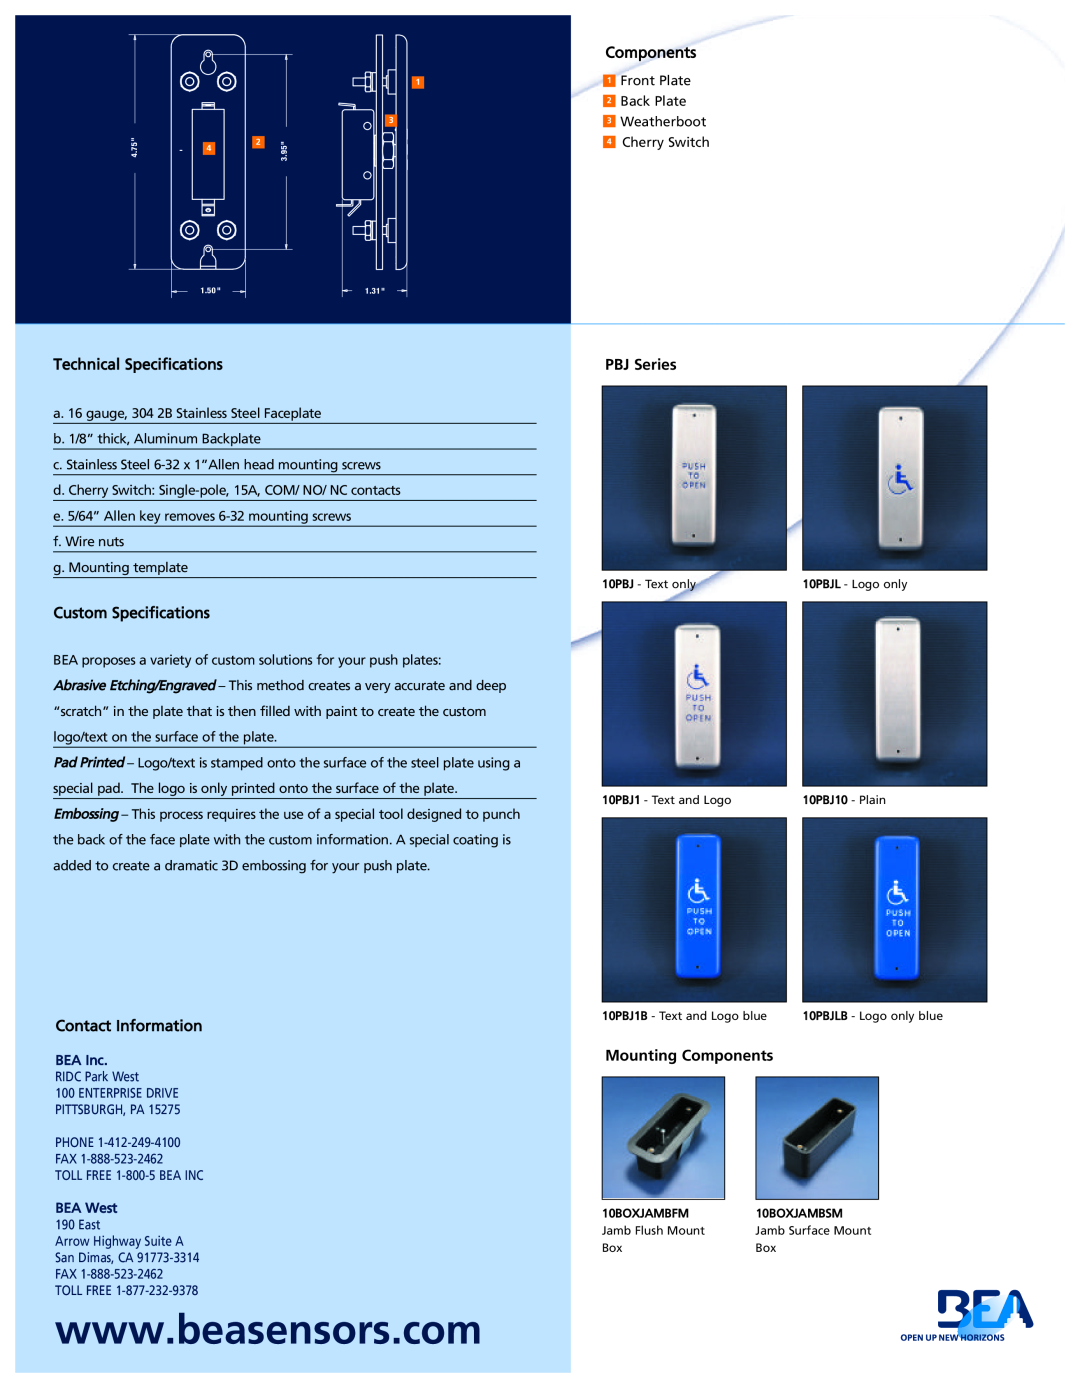 BEA PBJ Series specifications Technical Specifications, Custom Specifications, Contact Information, Mounting Components 